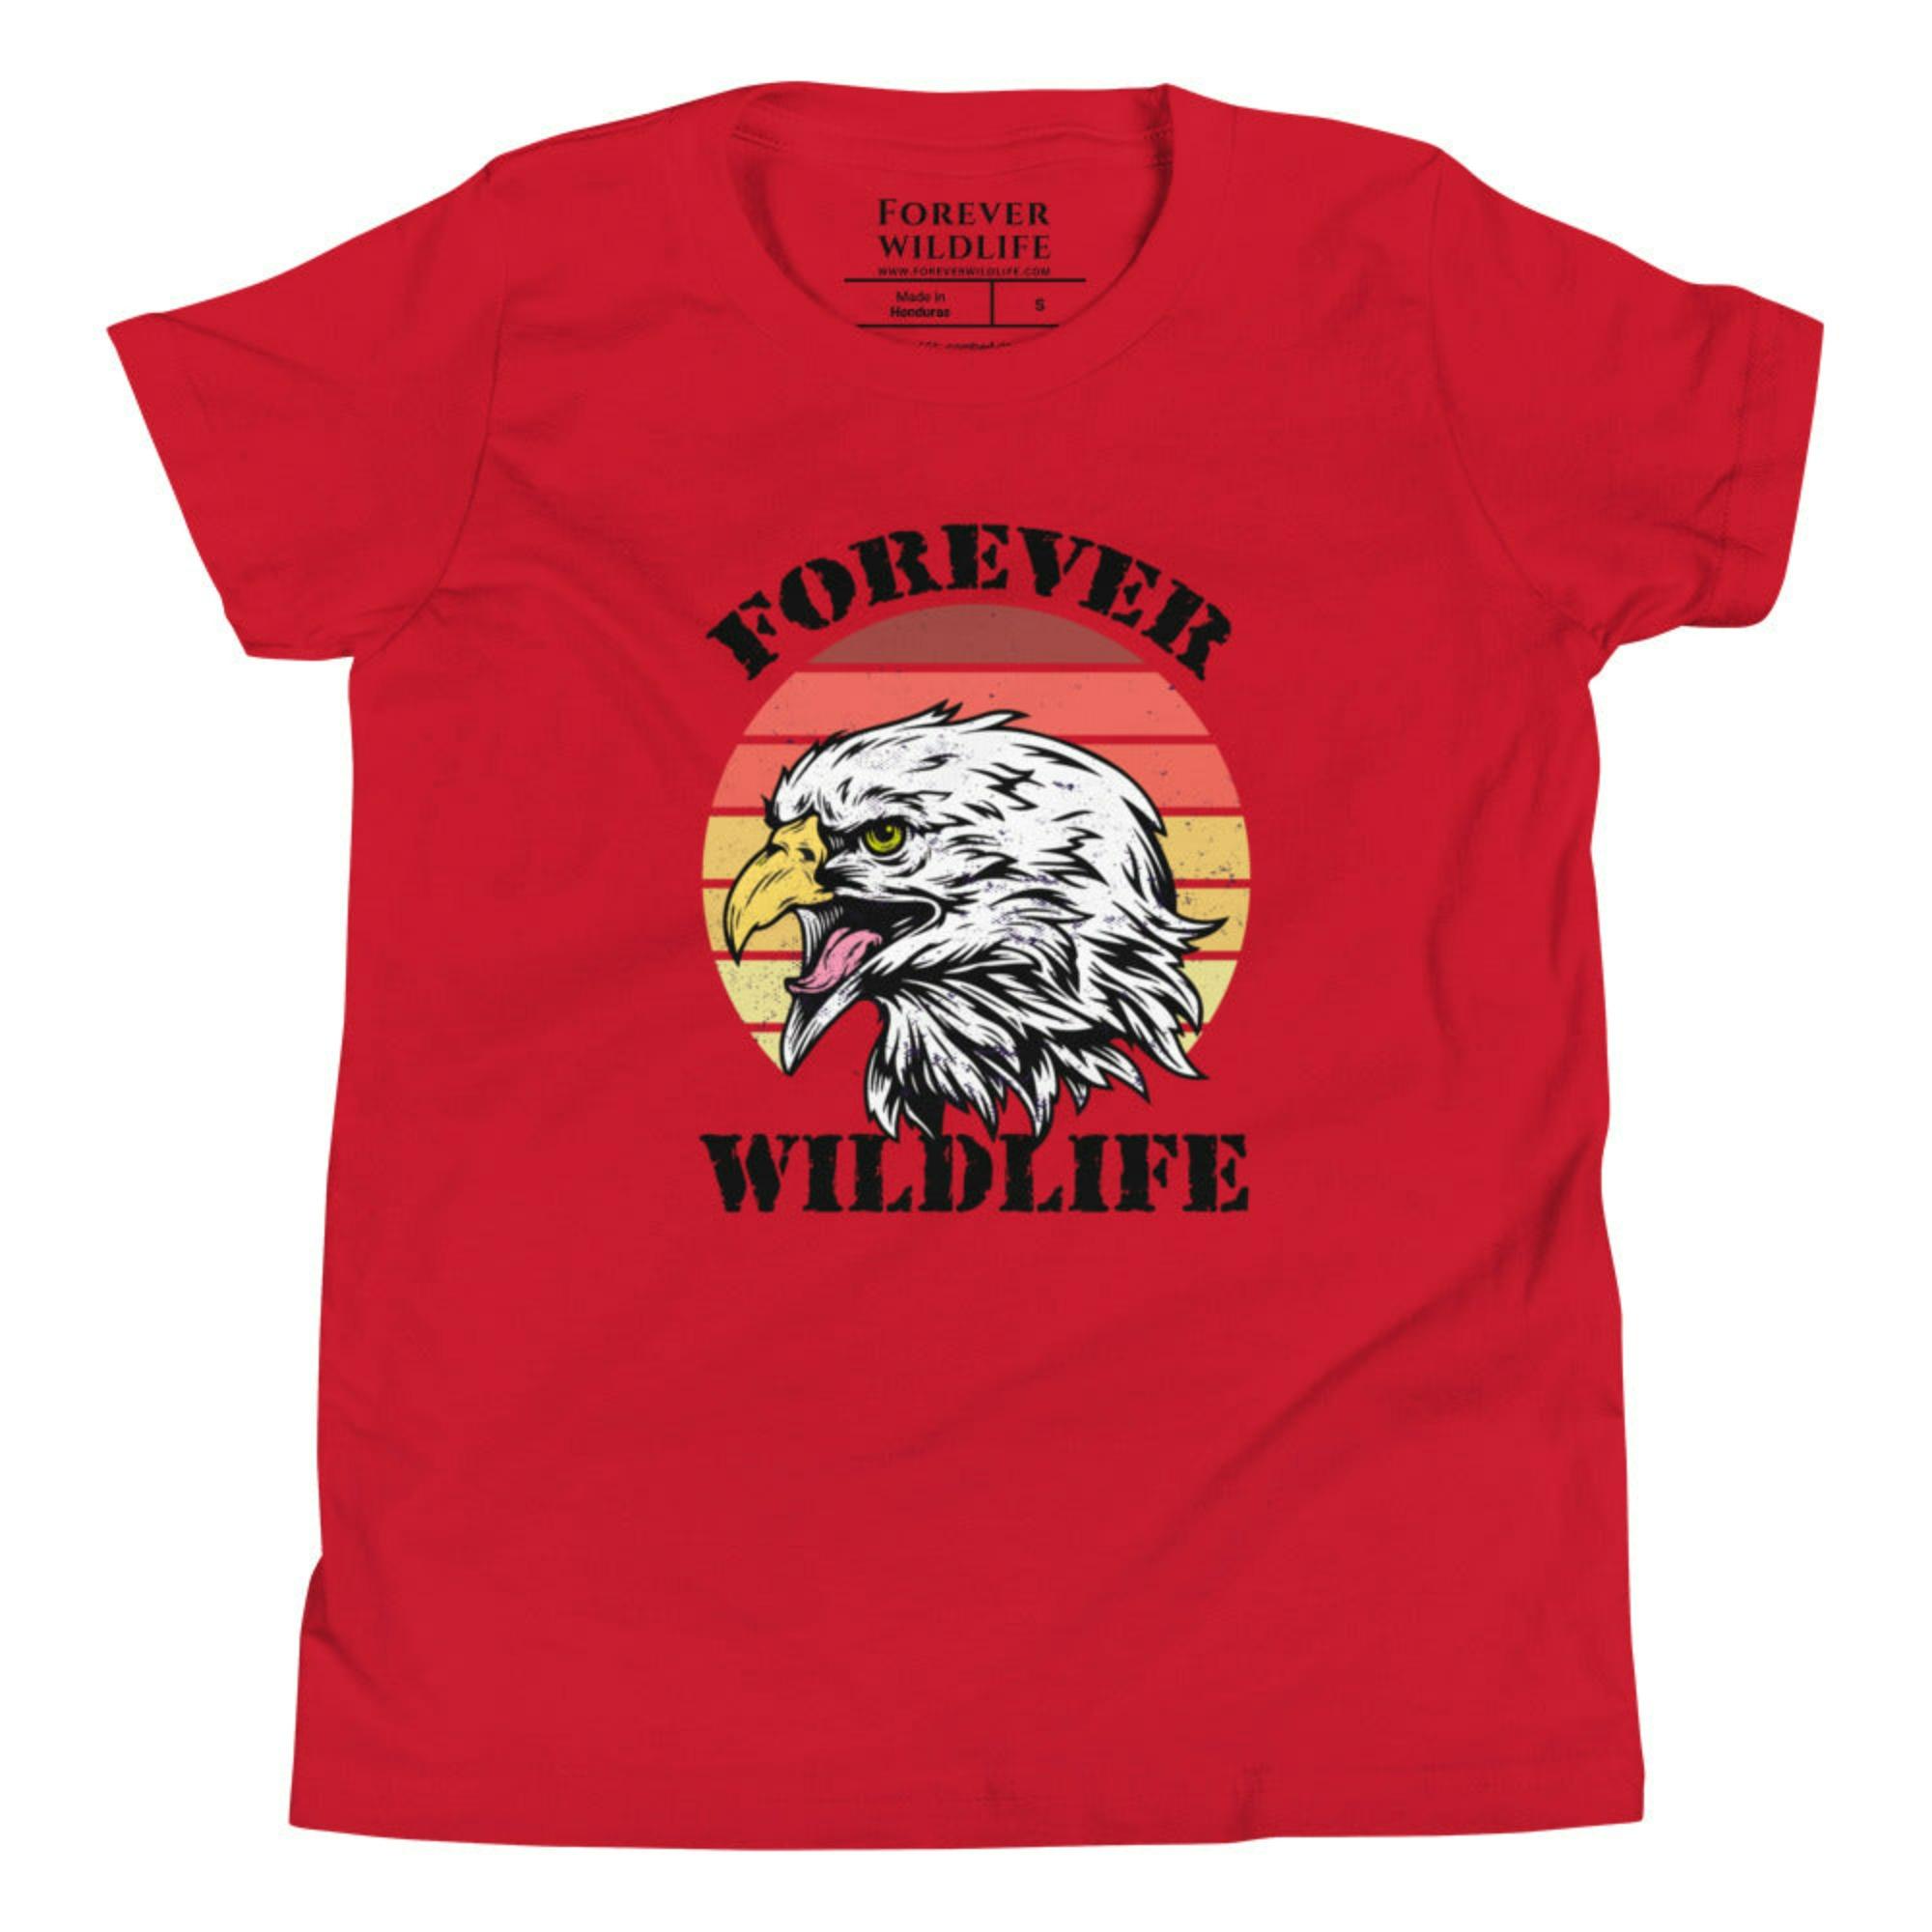 Red Youth T-Shirt with Eagle graphic as part of Wildlife T Shirts, Wildlife Clothing & Apparel by Forever Wildlife